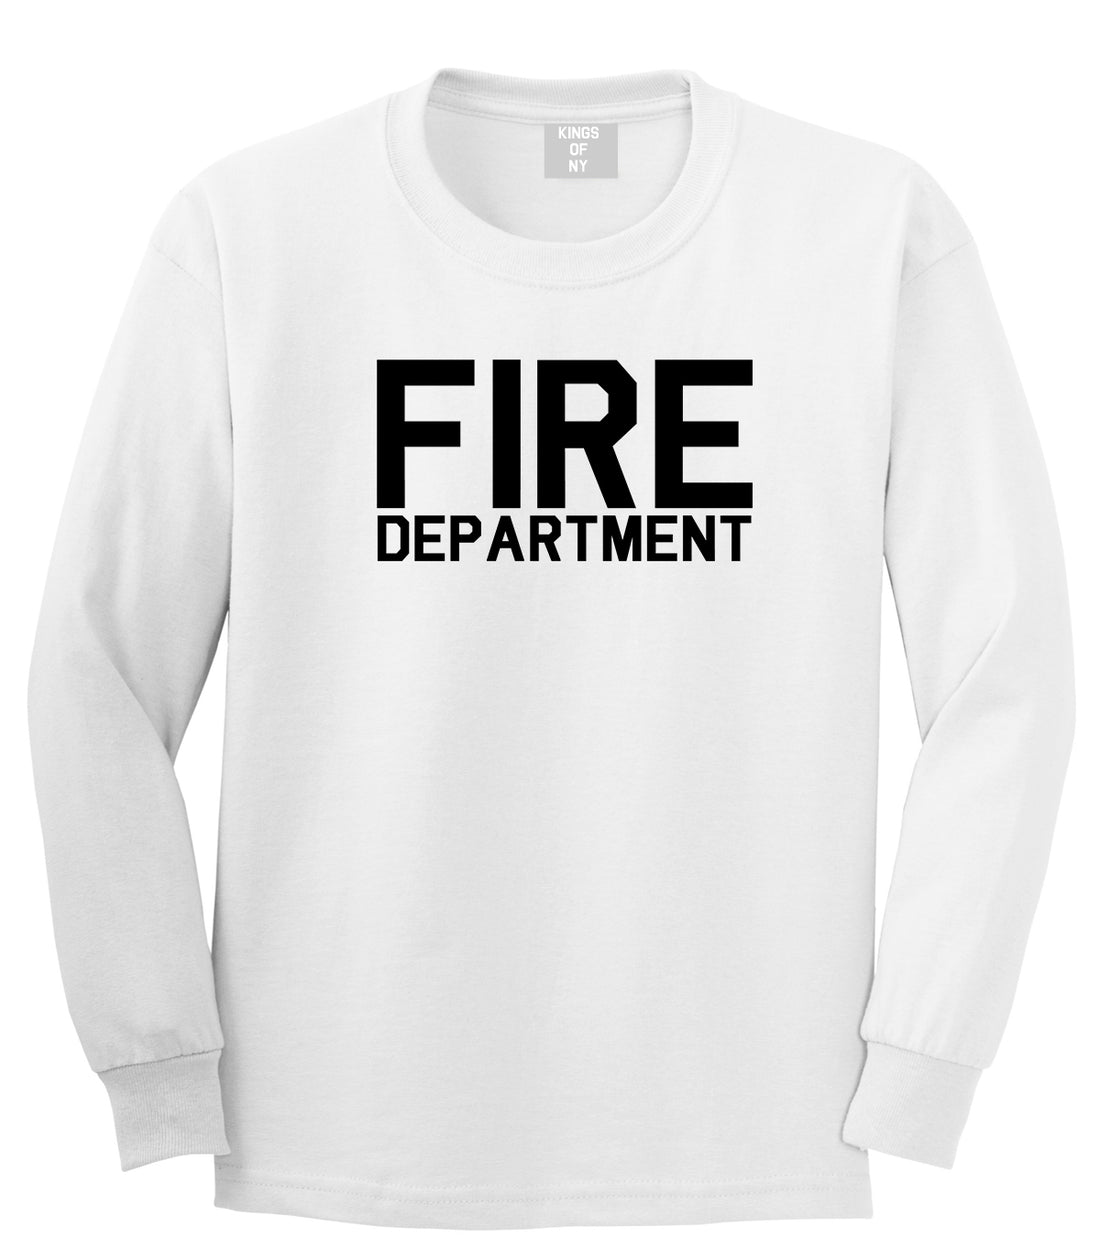 Fire Department Dept Mens White Long Sleeve T-Shirt by KINGS OF NY